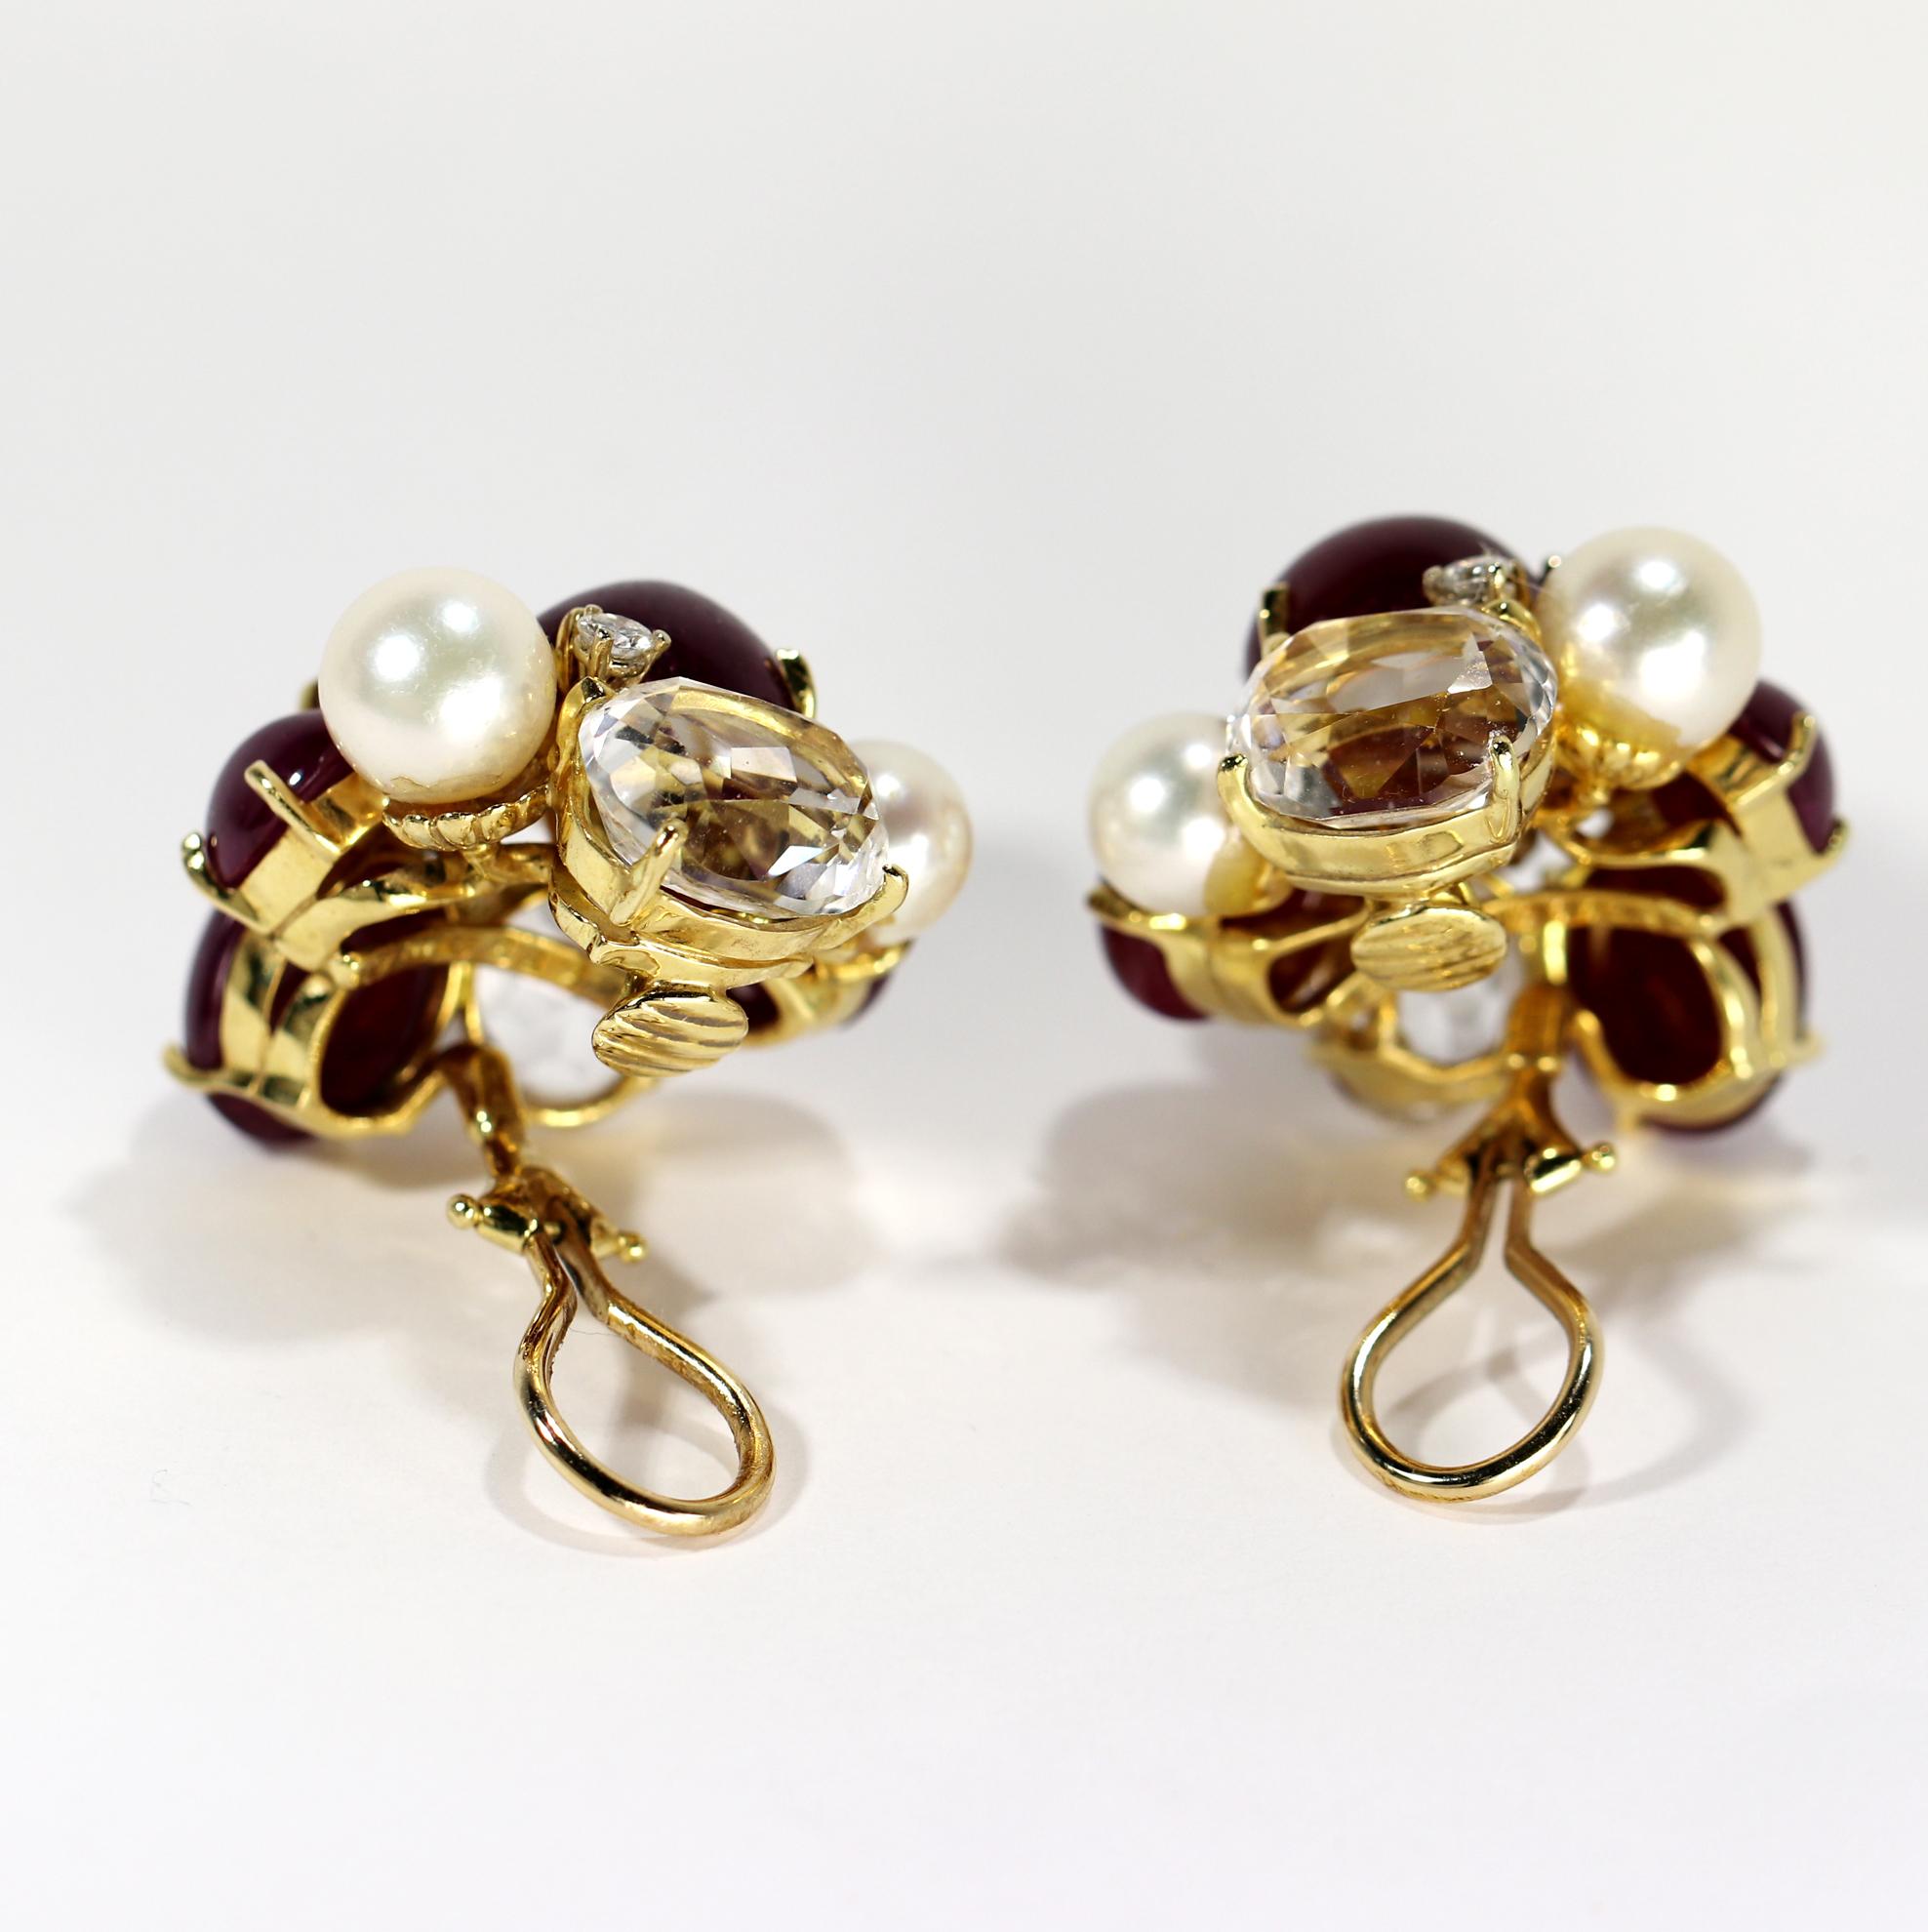 Seaman Schepps Bubble Earrings with Rubies Diamonds and Pearls 1